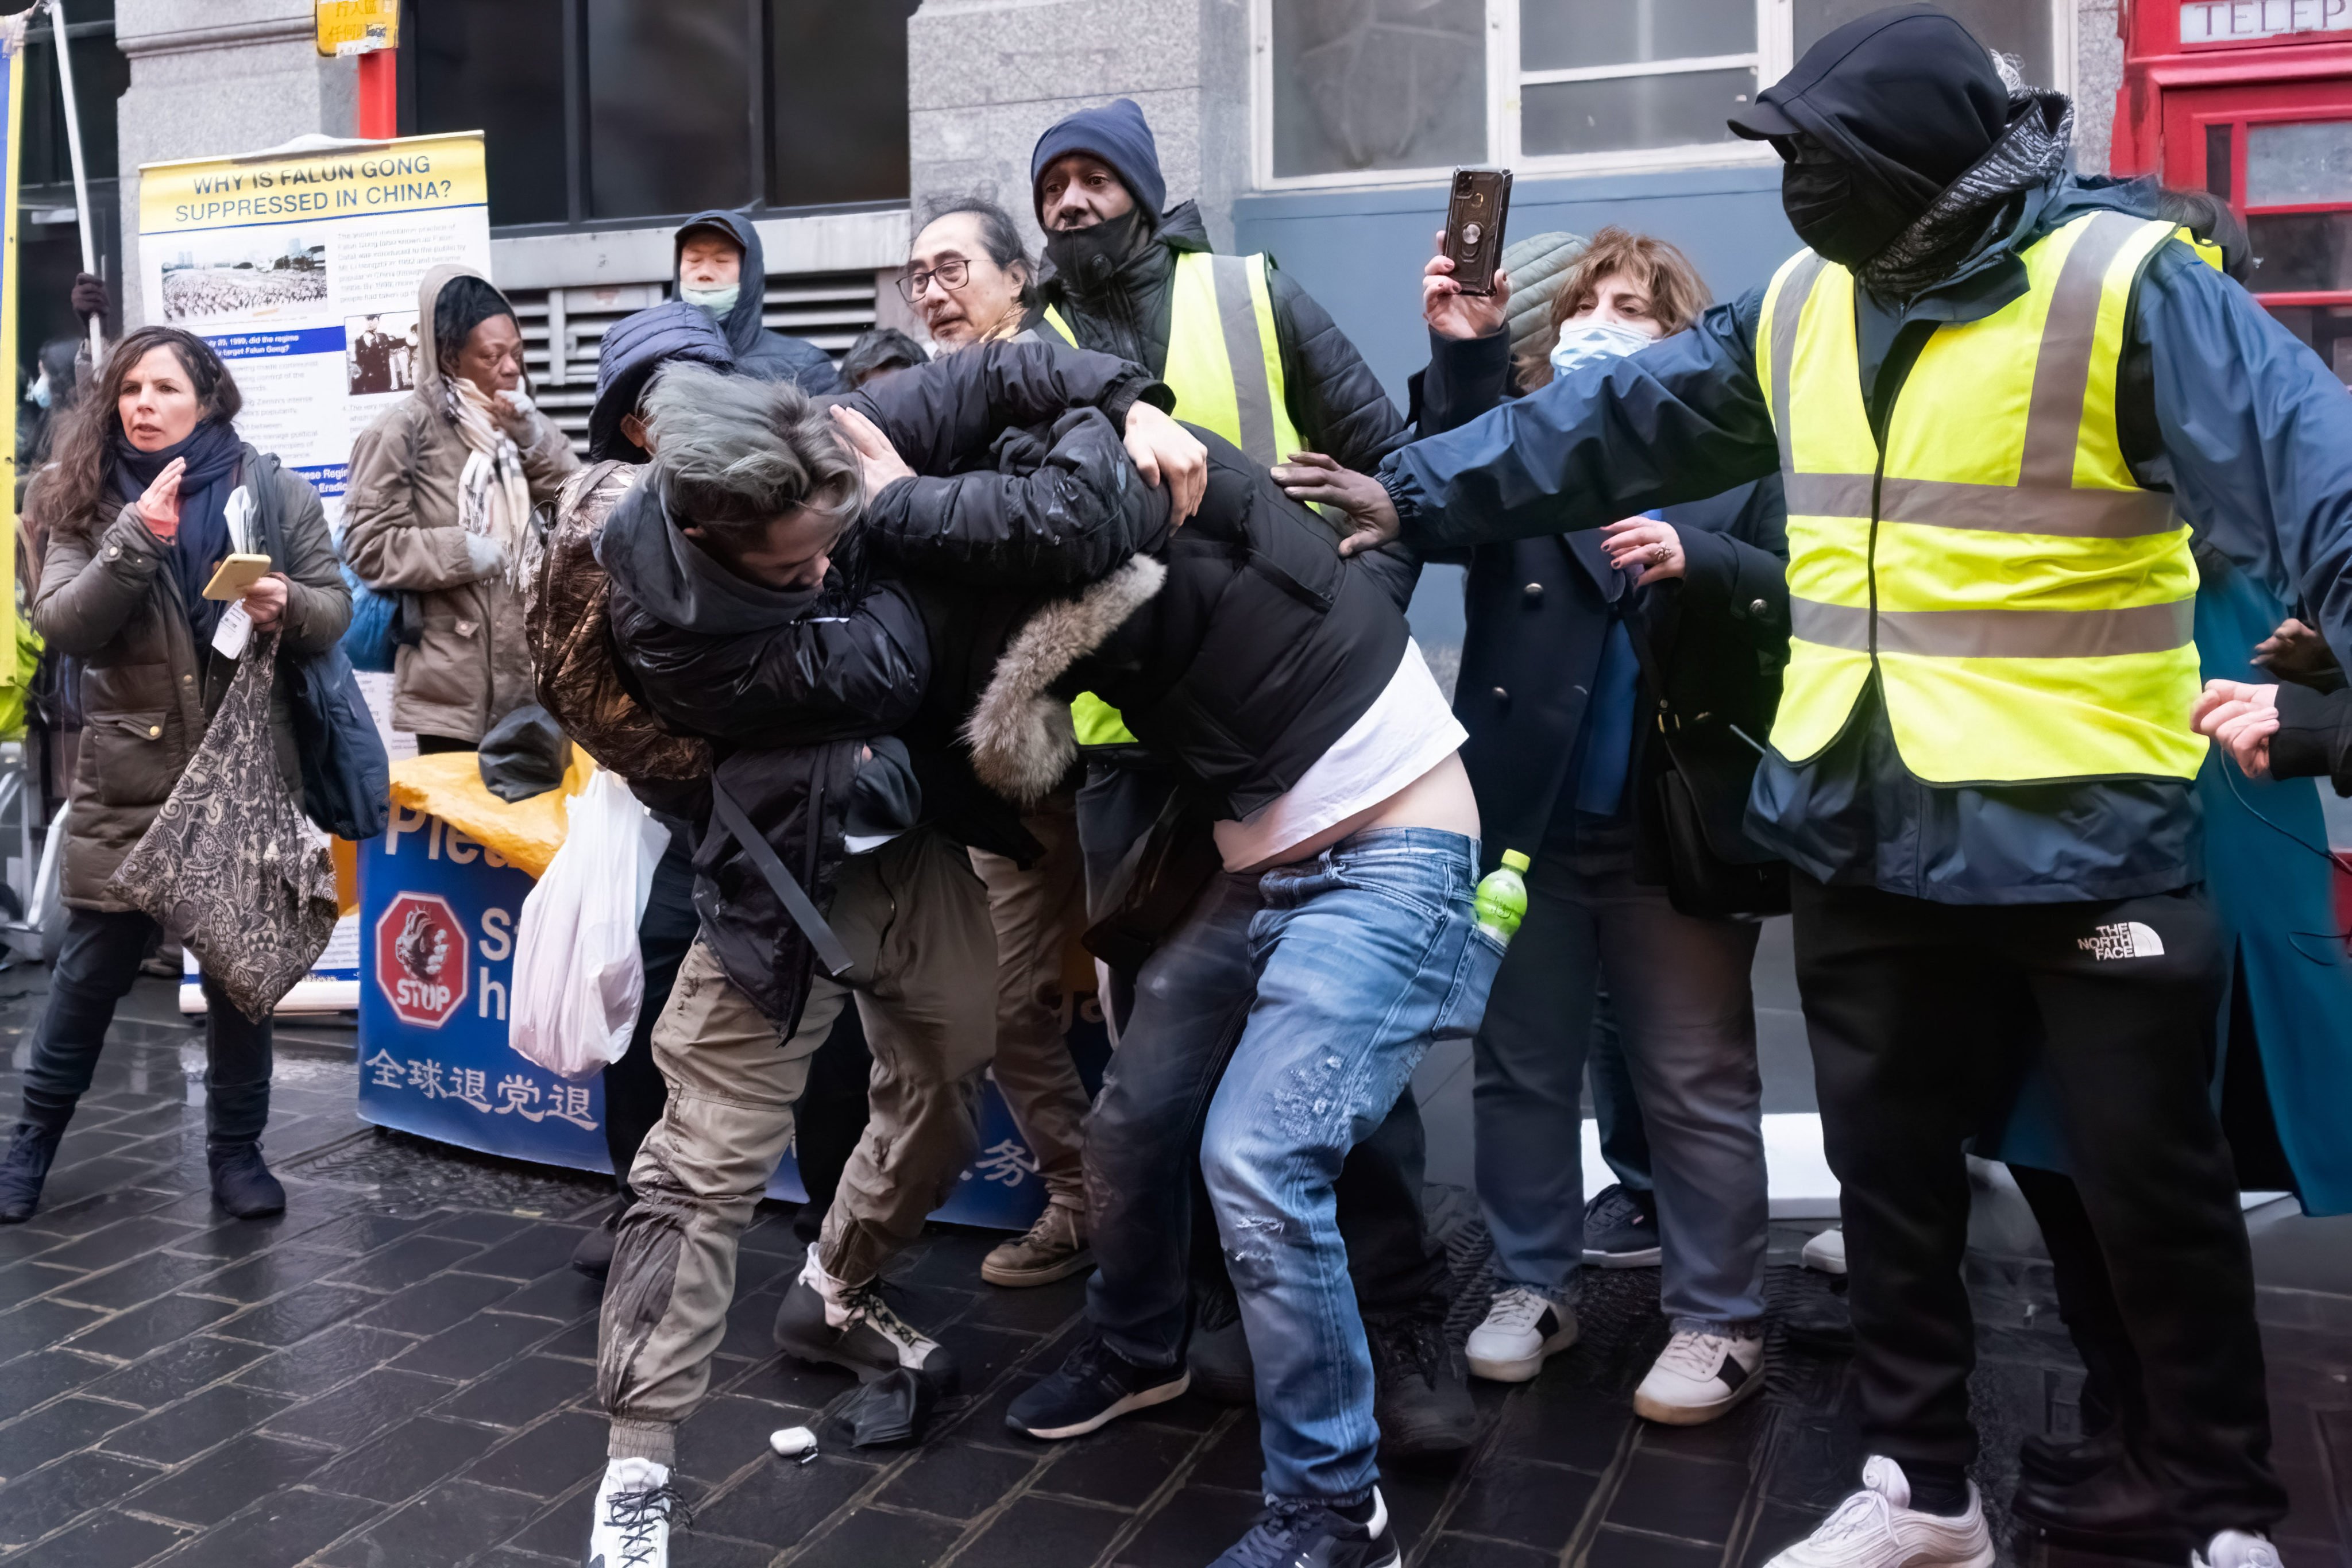 A scuffle breaks out between a pro-Beijing group and Hong Kong migrants during a rally in London’s Chinatown on Saturday. Photo: Getty Images

